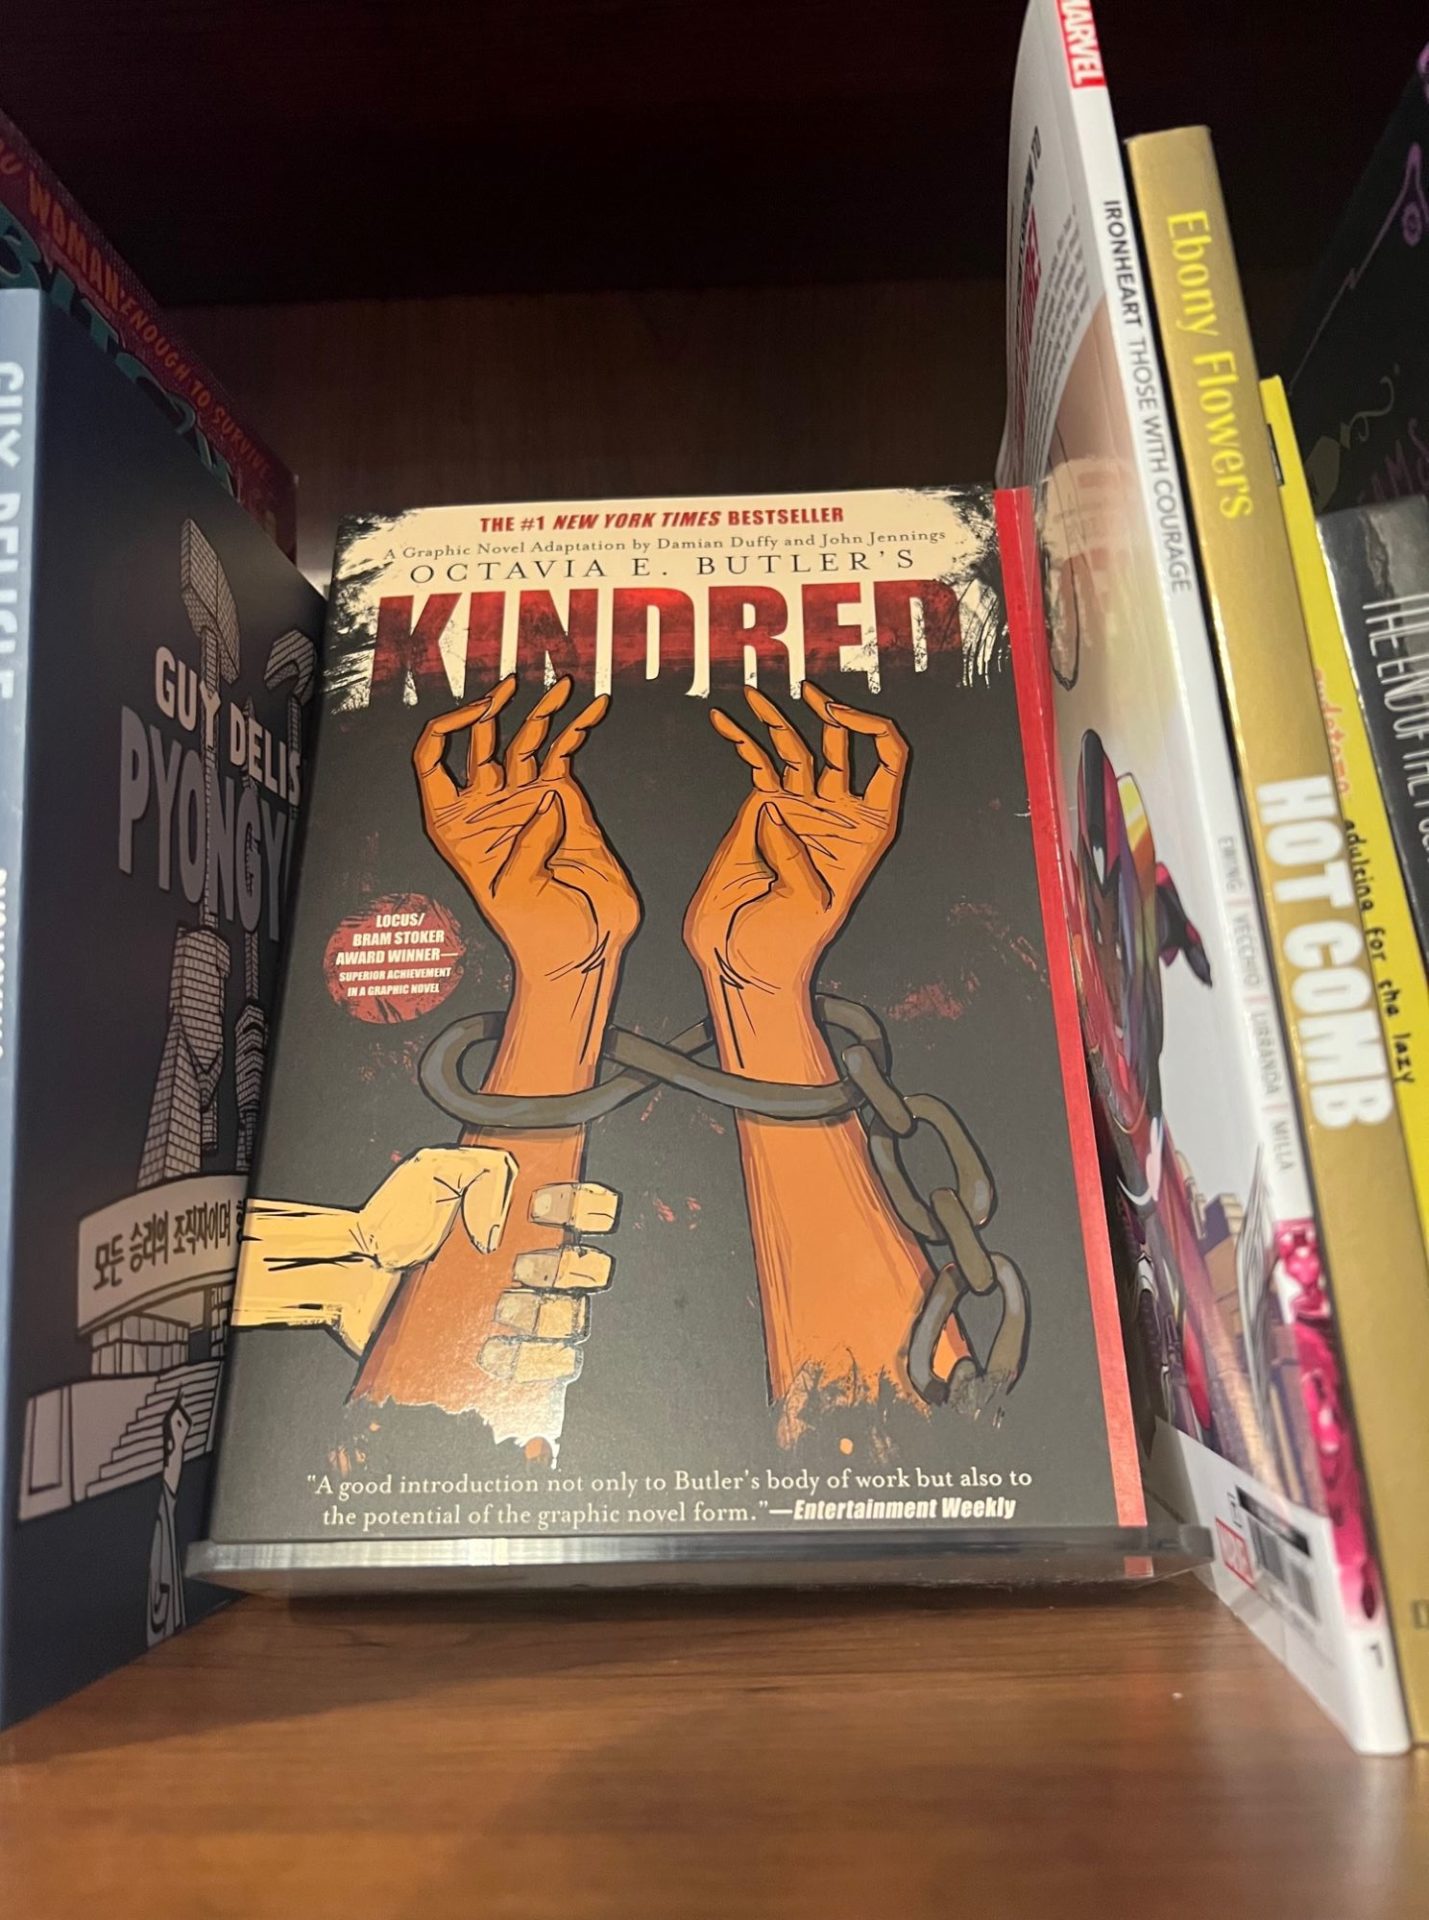 A book with two brown hands bound by handcuffs and the word Kindred in red letters sits on a brown wooden shelf with the spines of other books along either side.